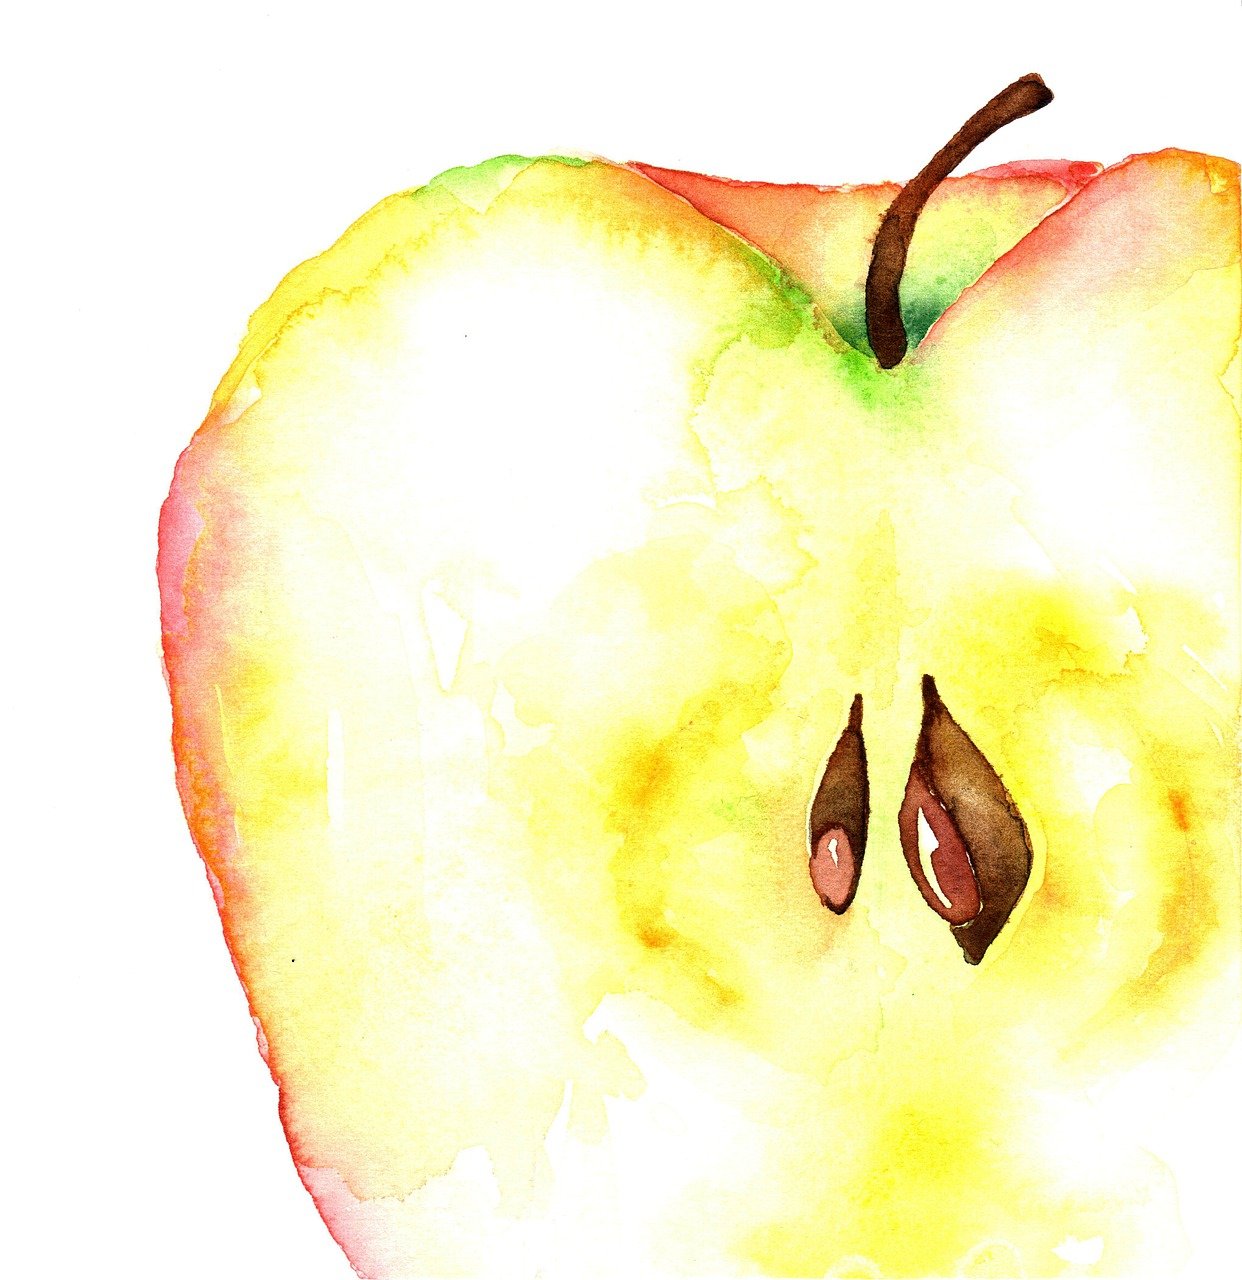 a watercolor painting of an apple cut in half, a watercolor painting, shutterstock, closeup photo, iphone 15 background, annie leibowit, art in the style of joshy sly